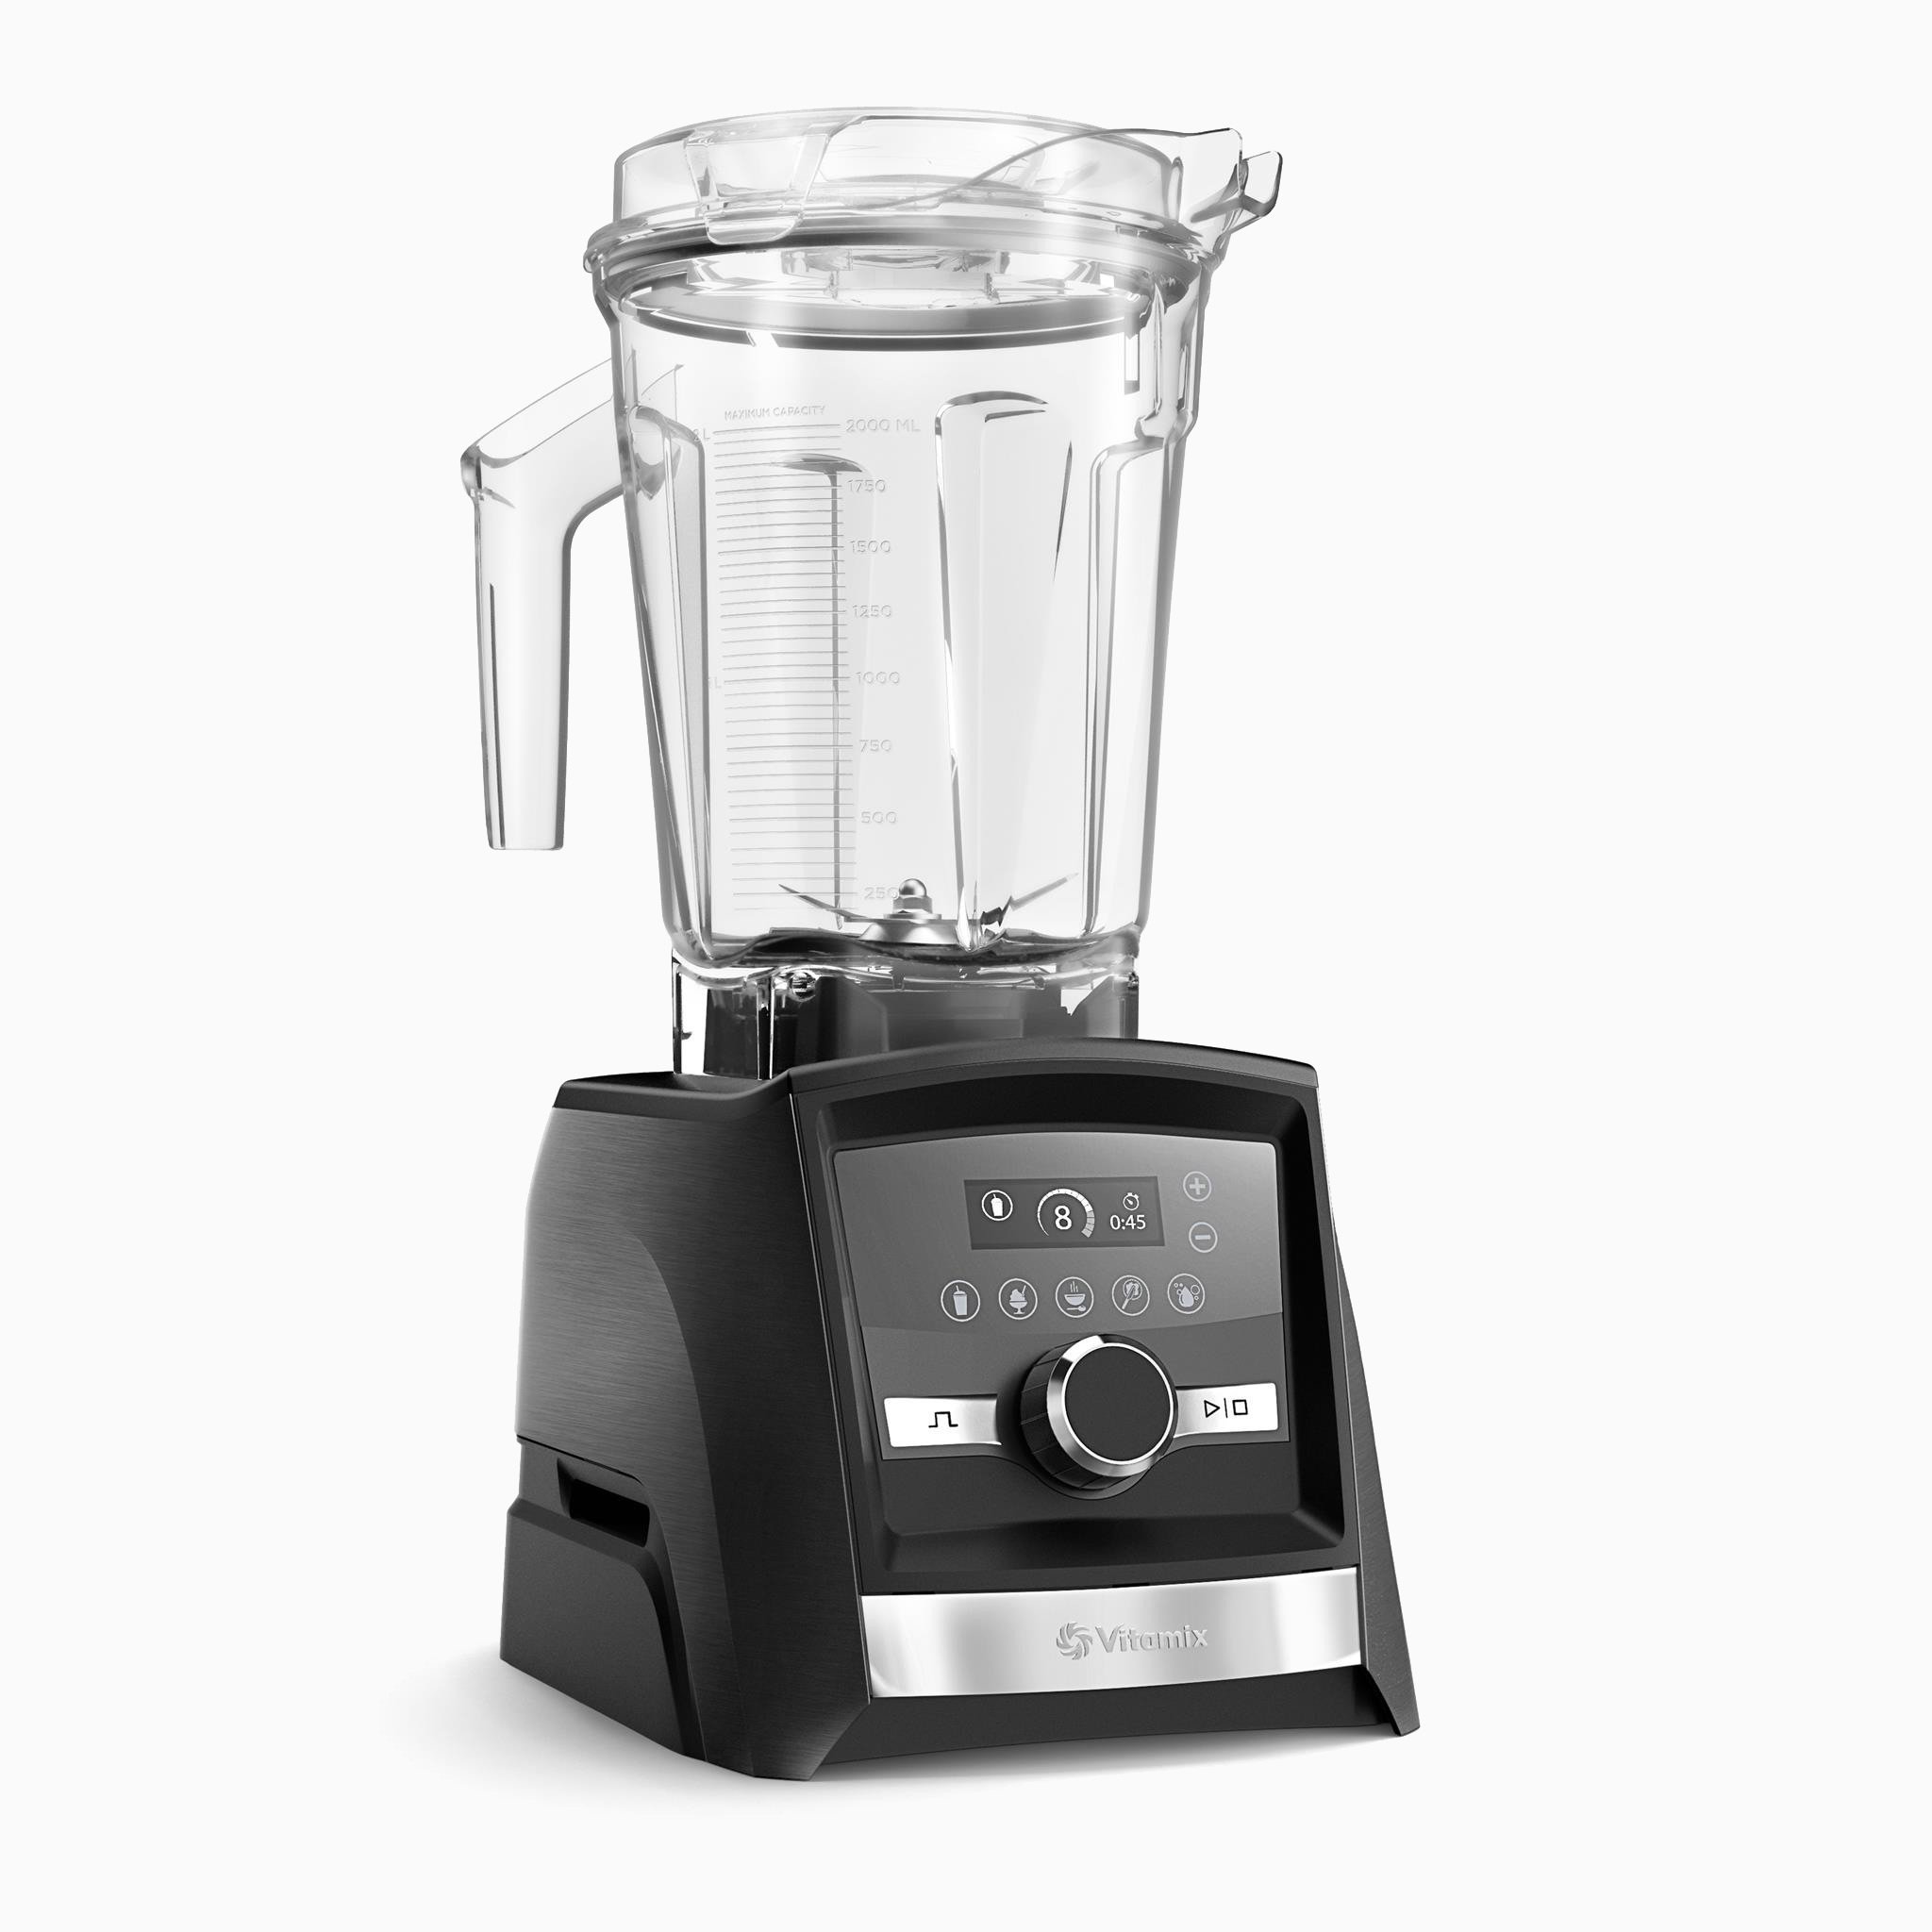 Why is the Vitamix blender the first choice of the people?